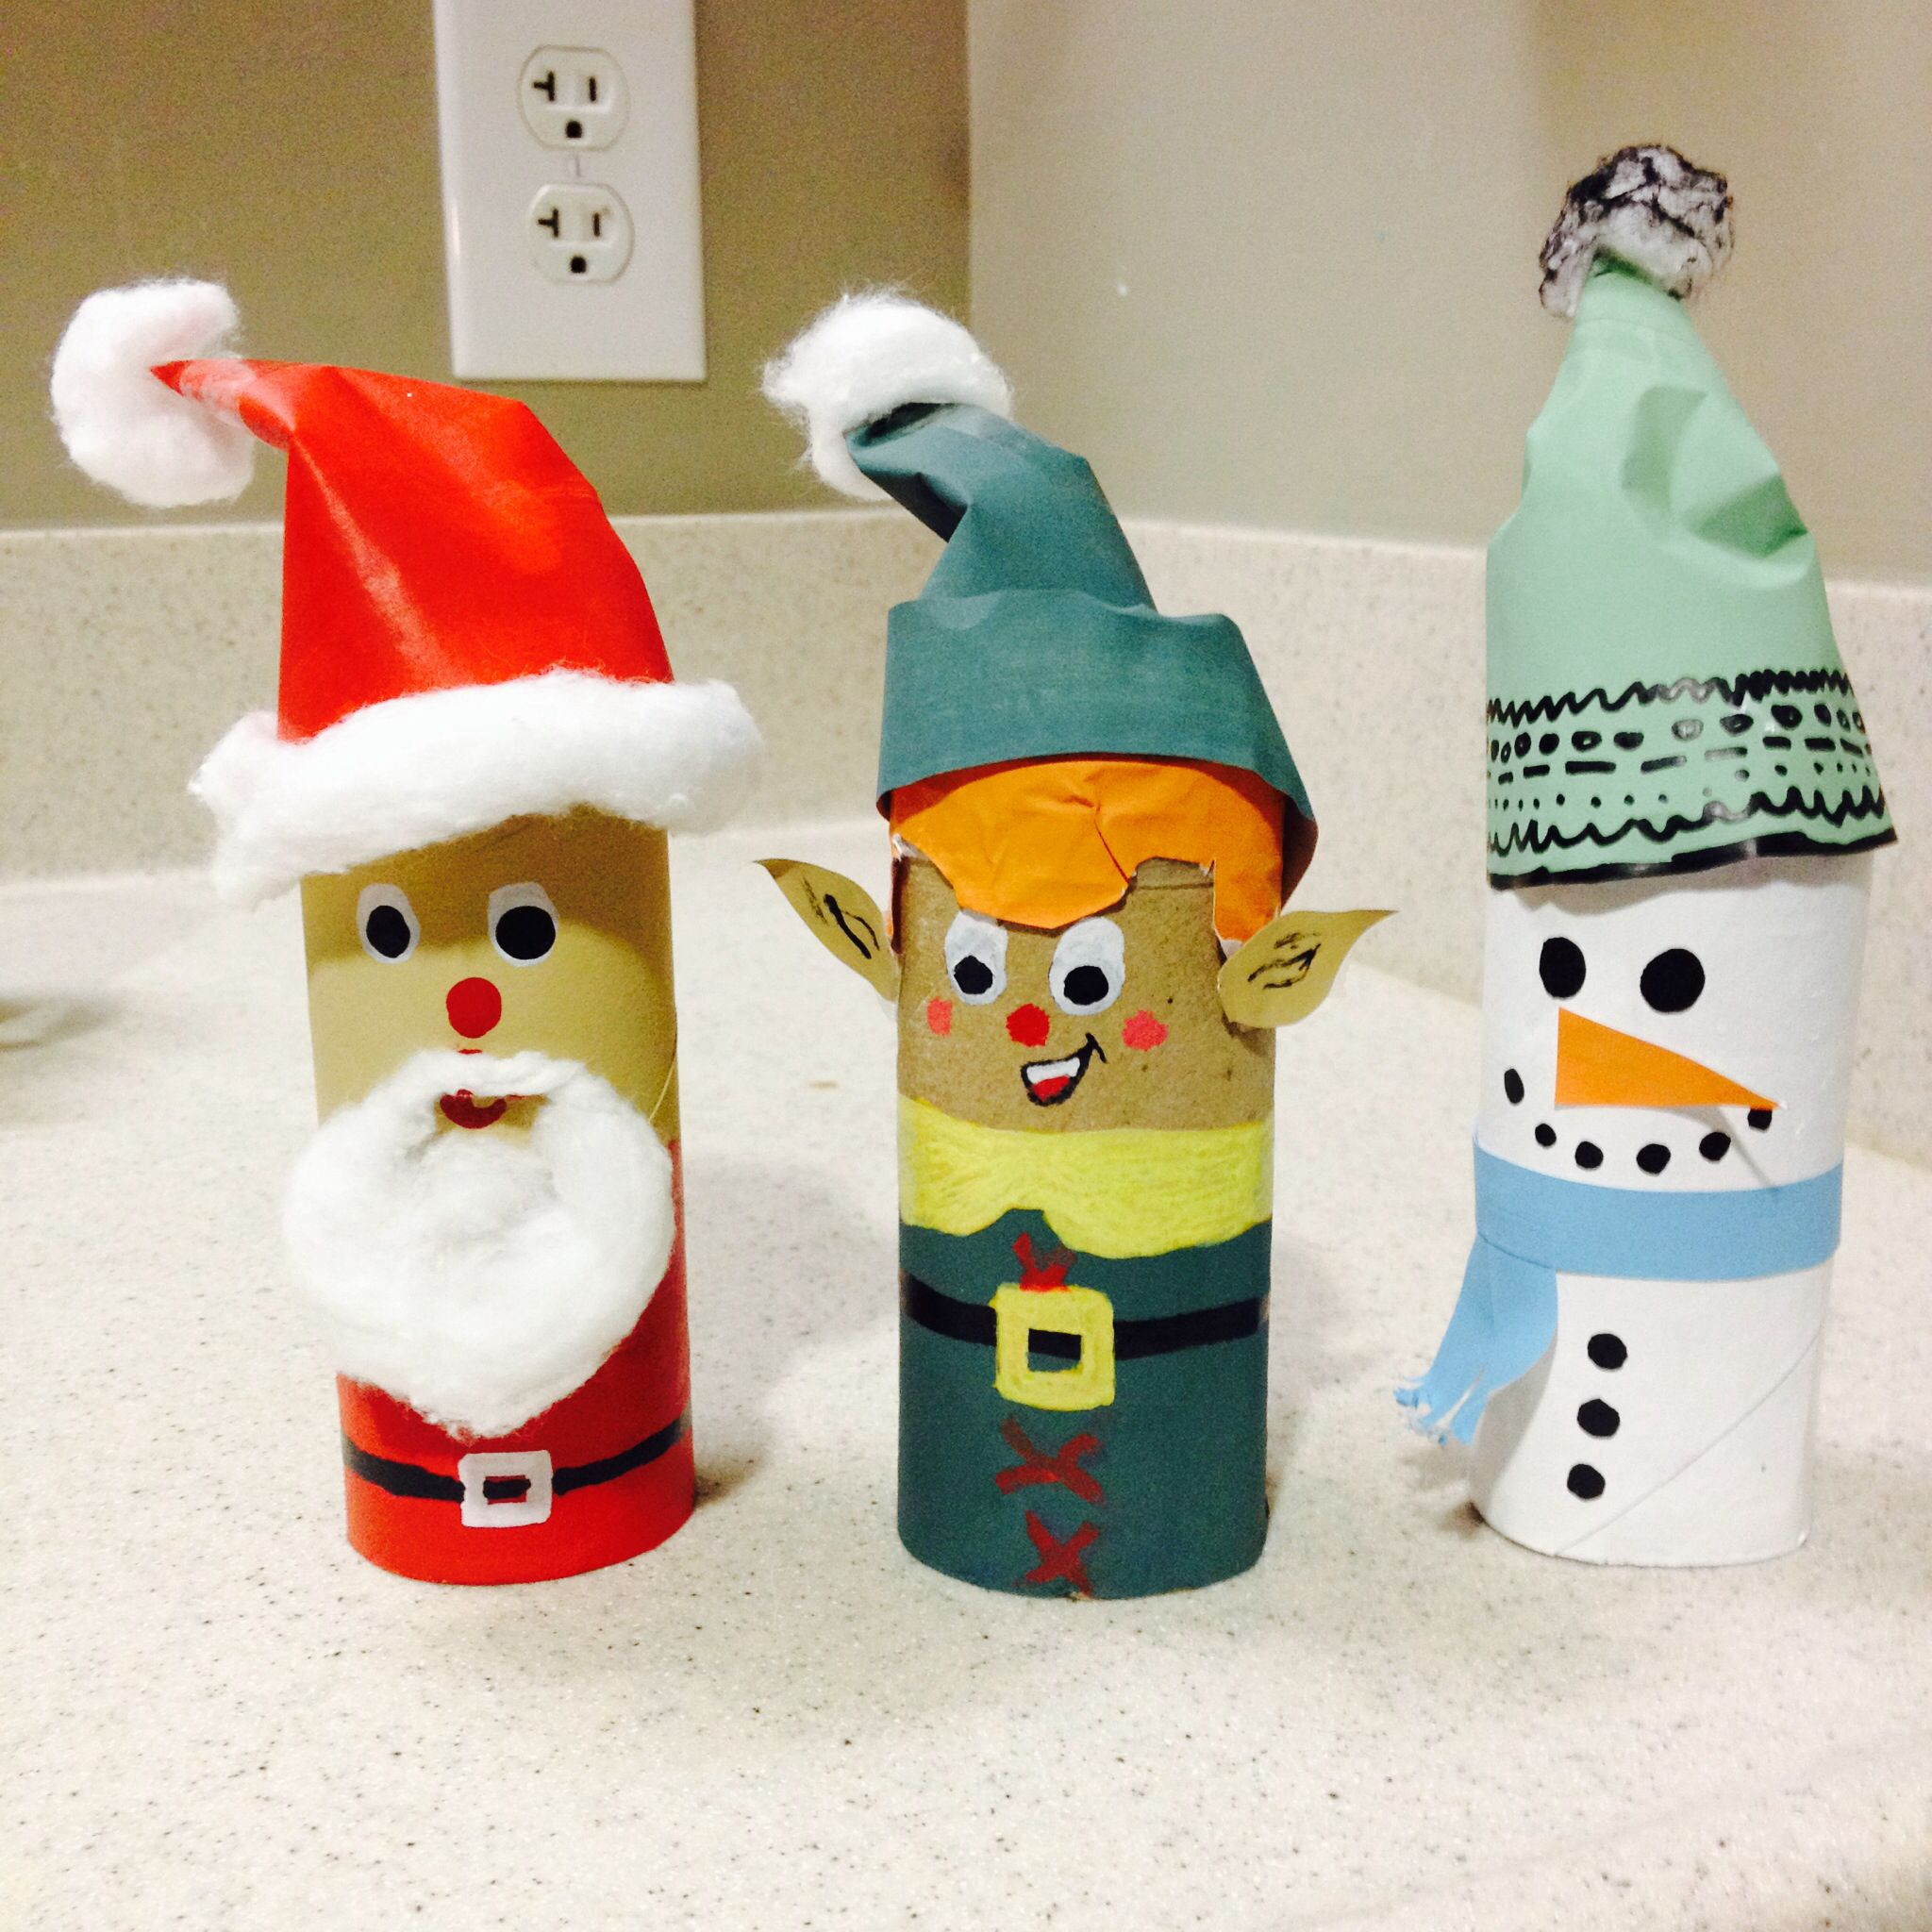 Toilet Paper Roll Christmas Crafts
 Toilet paper roll Christmas decorations